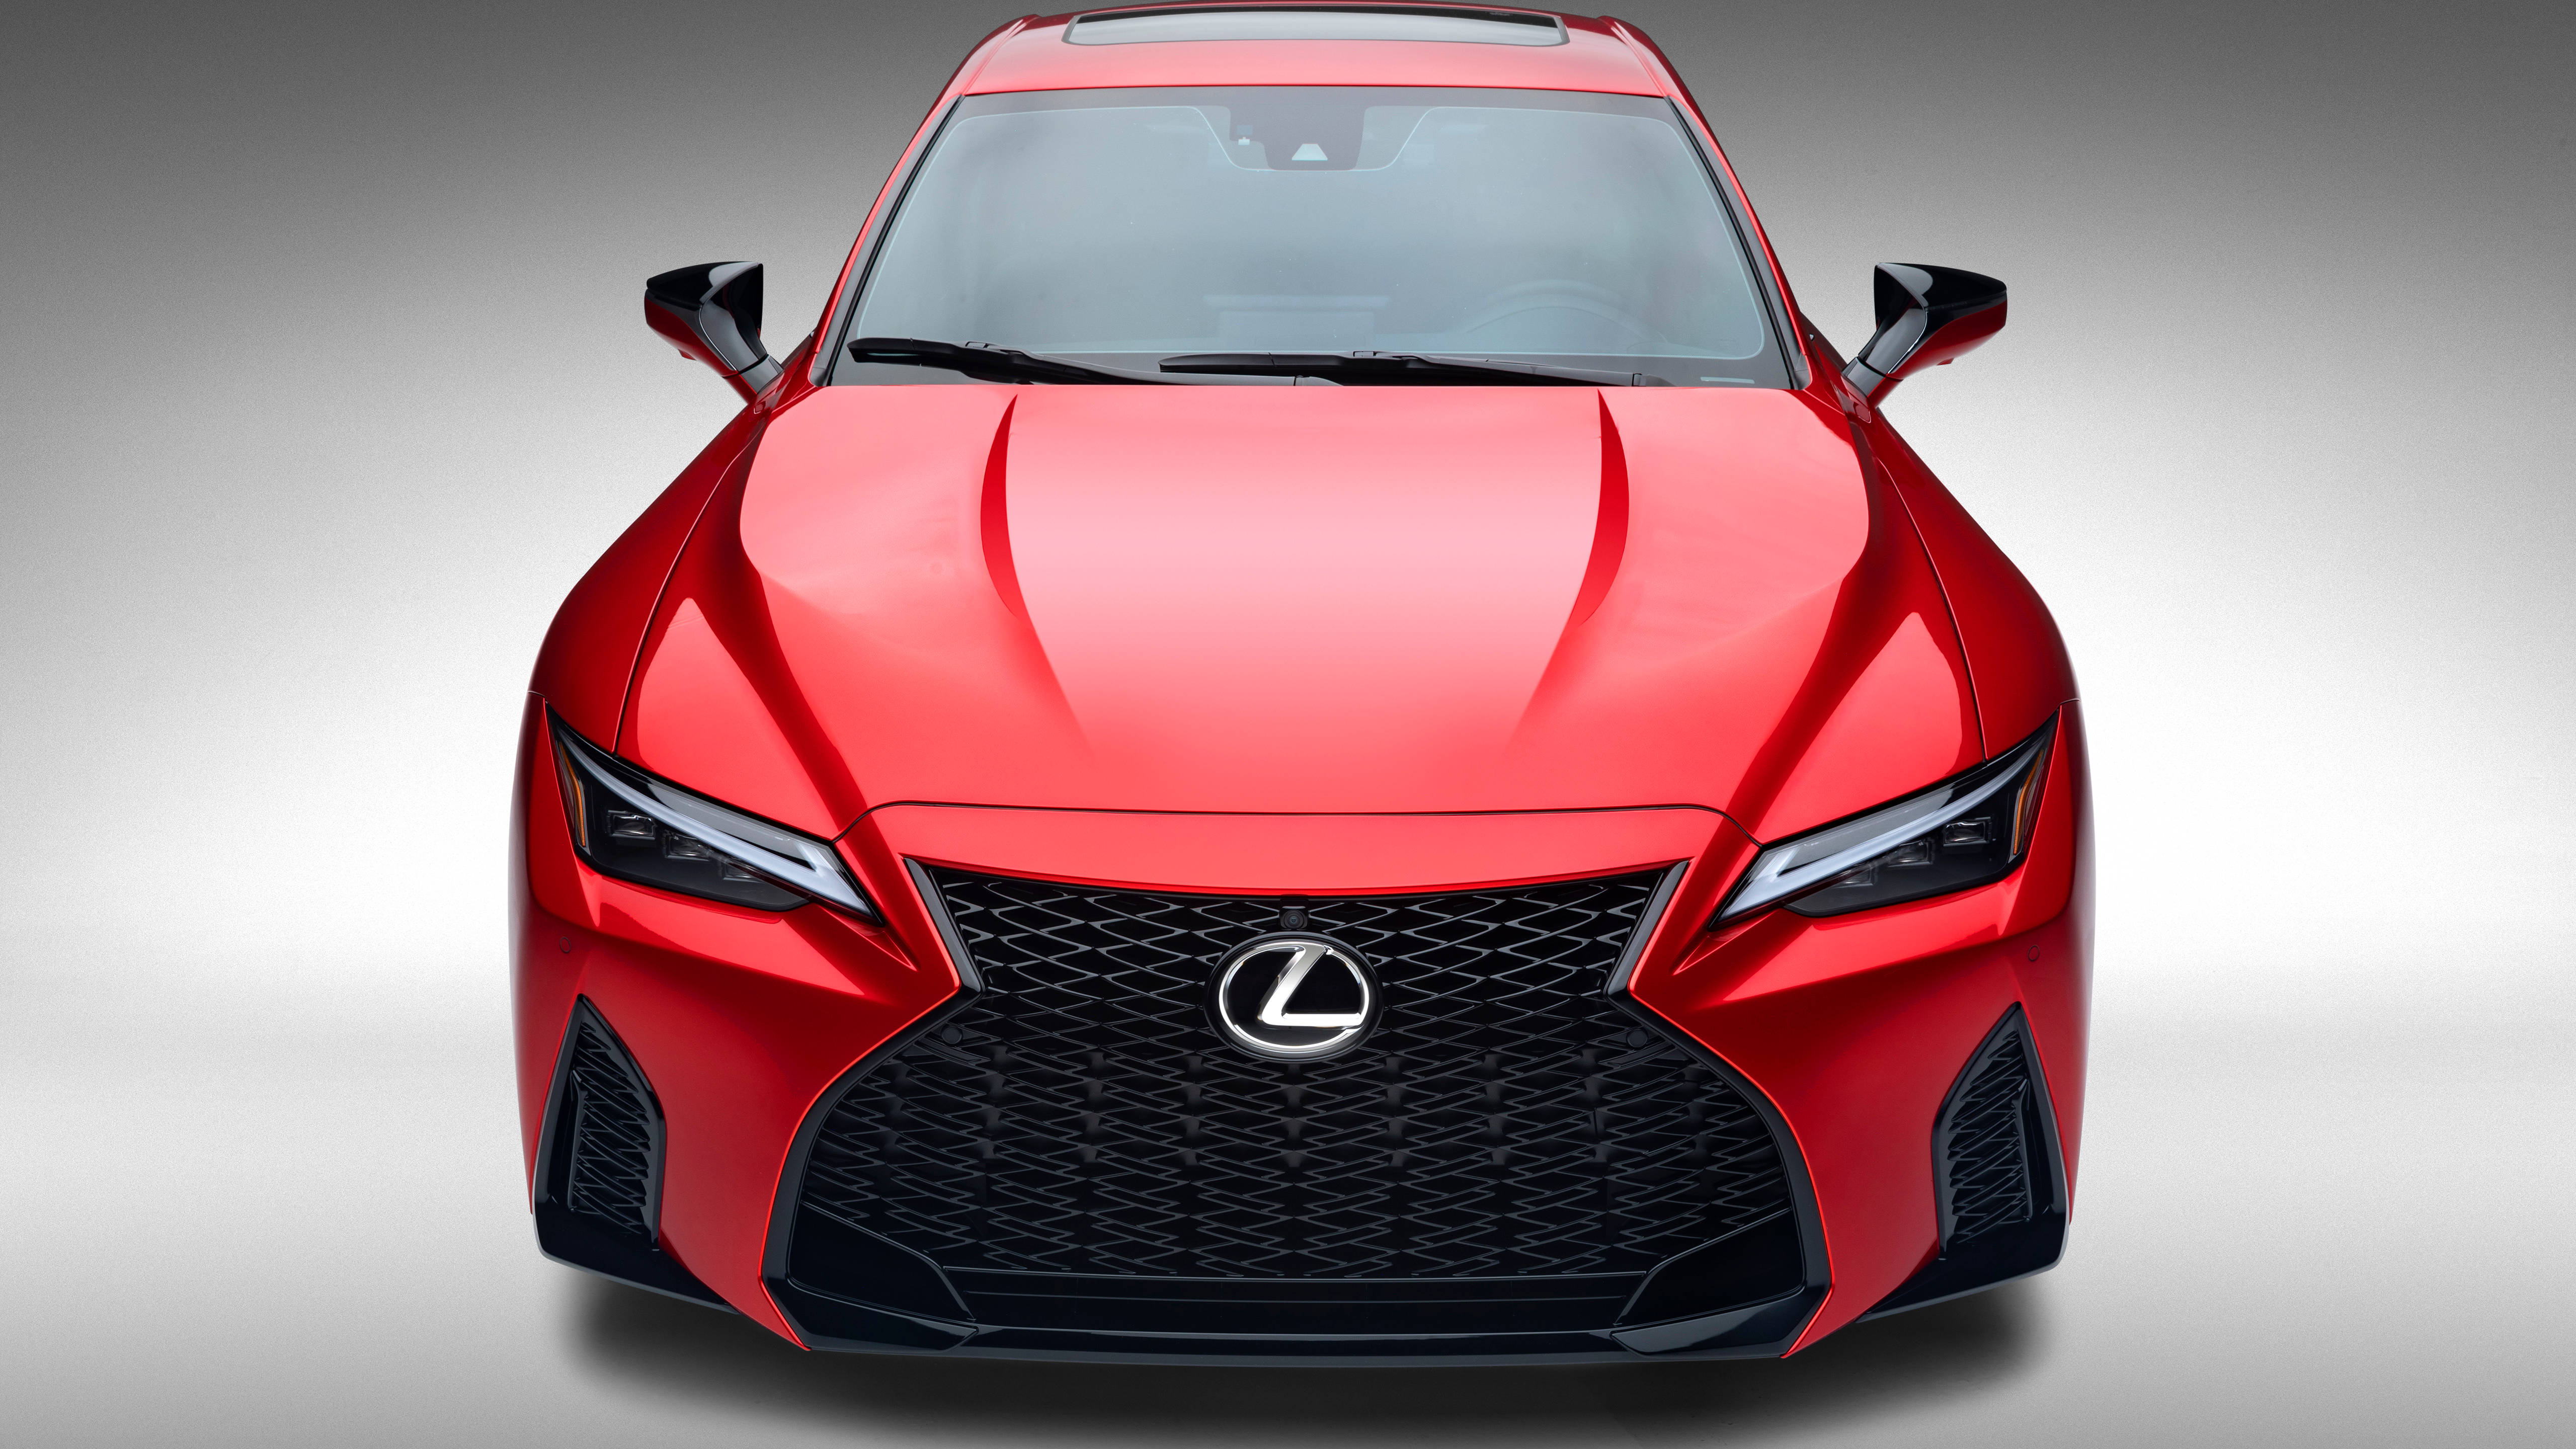 Cool Sports Car Red Lexus Is Wallpaper